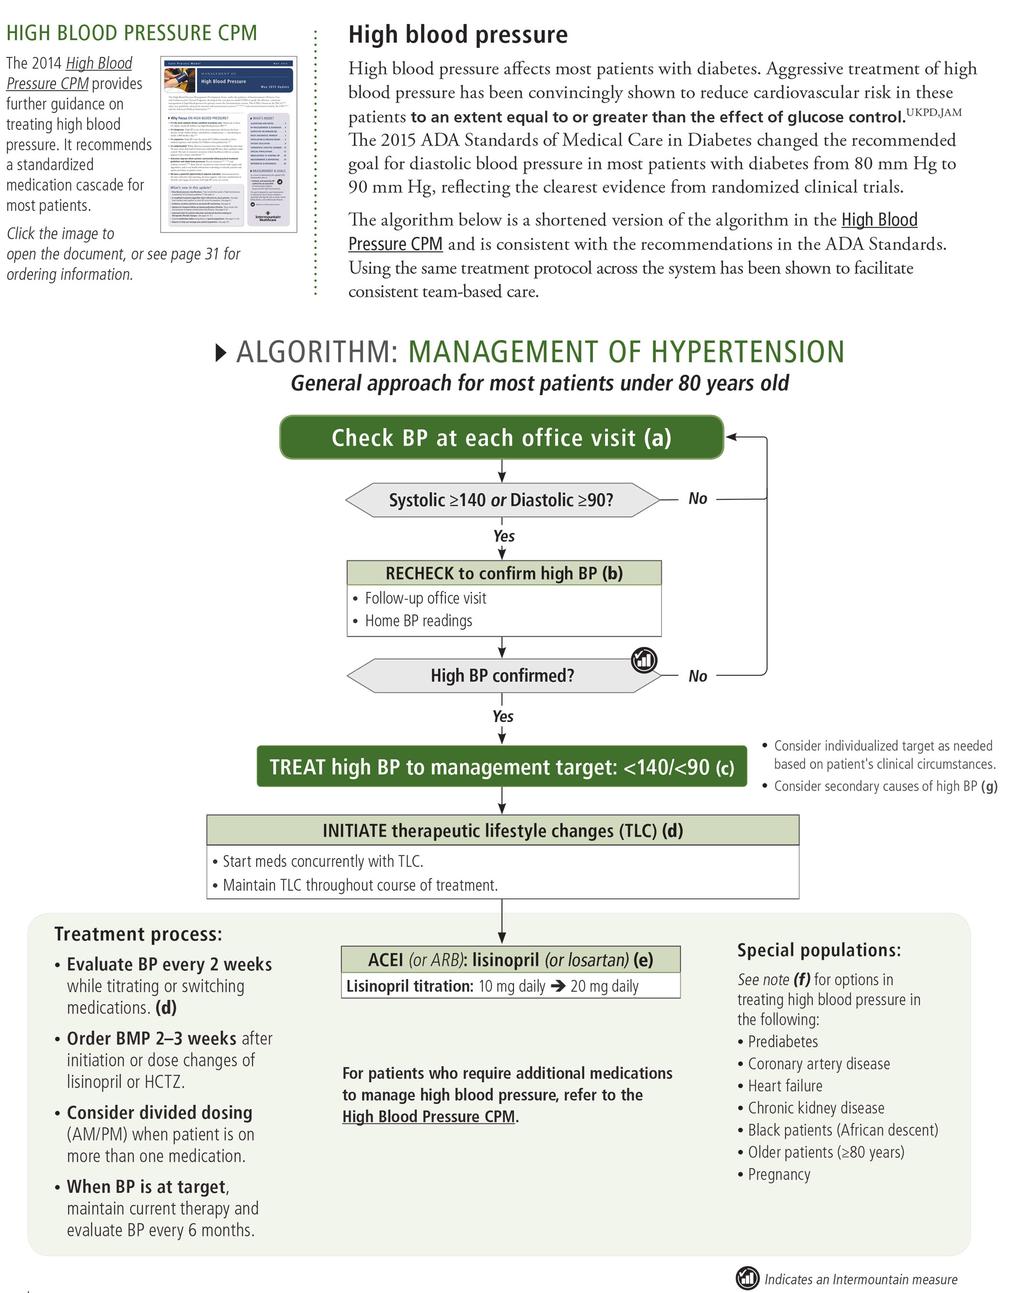 TOOL: HYPERTENSION ALGORITHM INTERMOUNTAIN HEALTHCARE Used with permission from